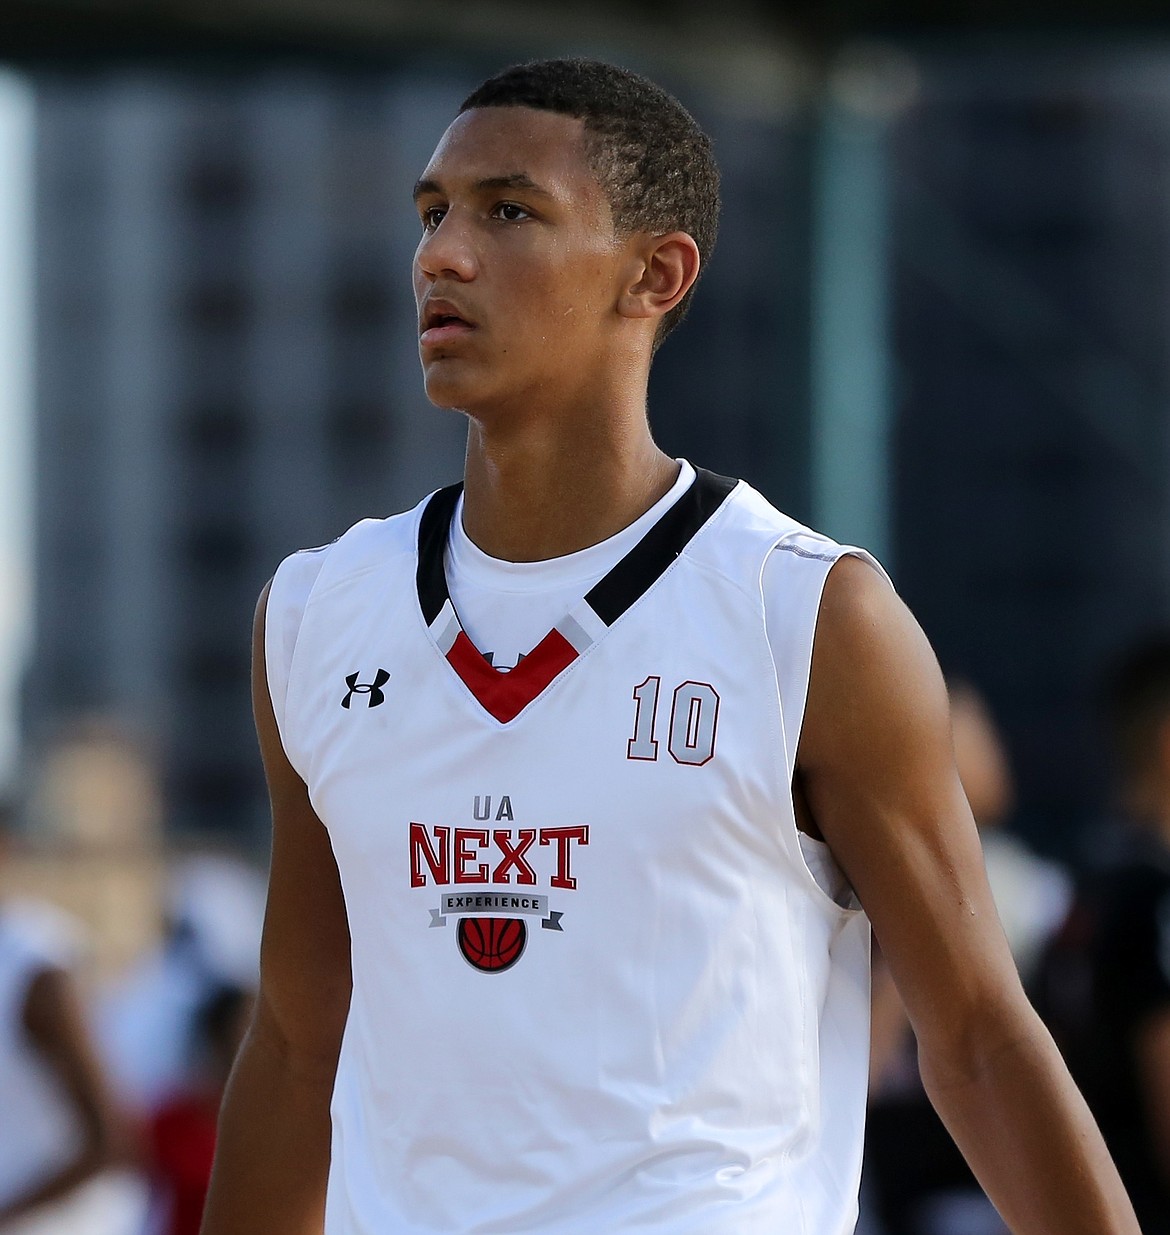 Jalen Suggs in action in the Under Armour Next 24 game in 2016 in Brooklyn, N.Y.